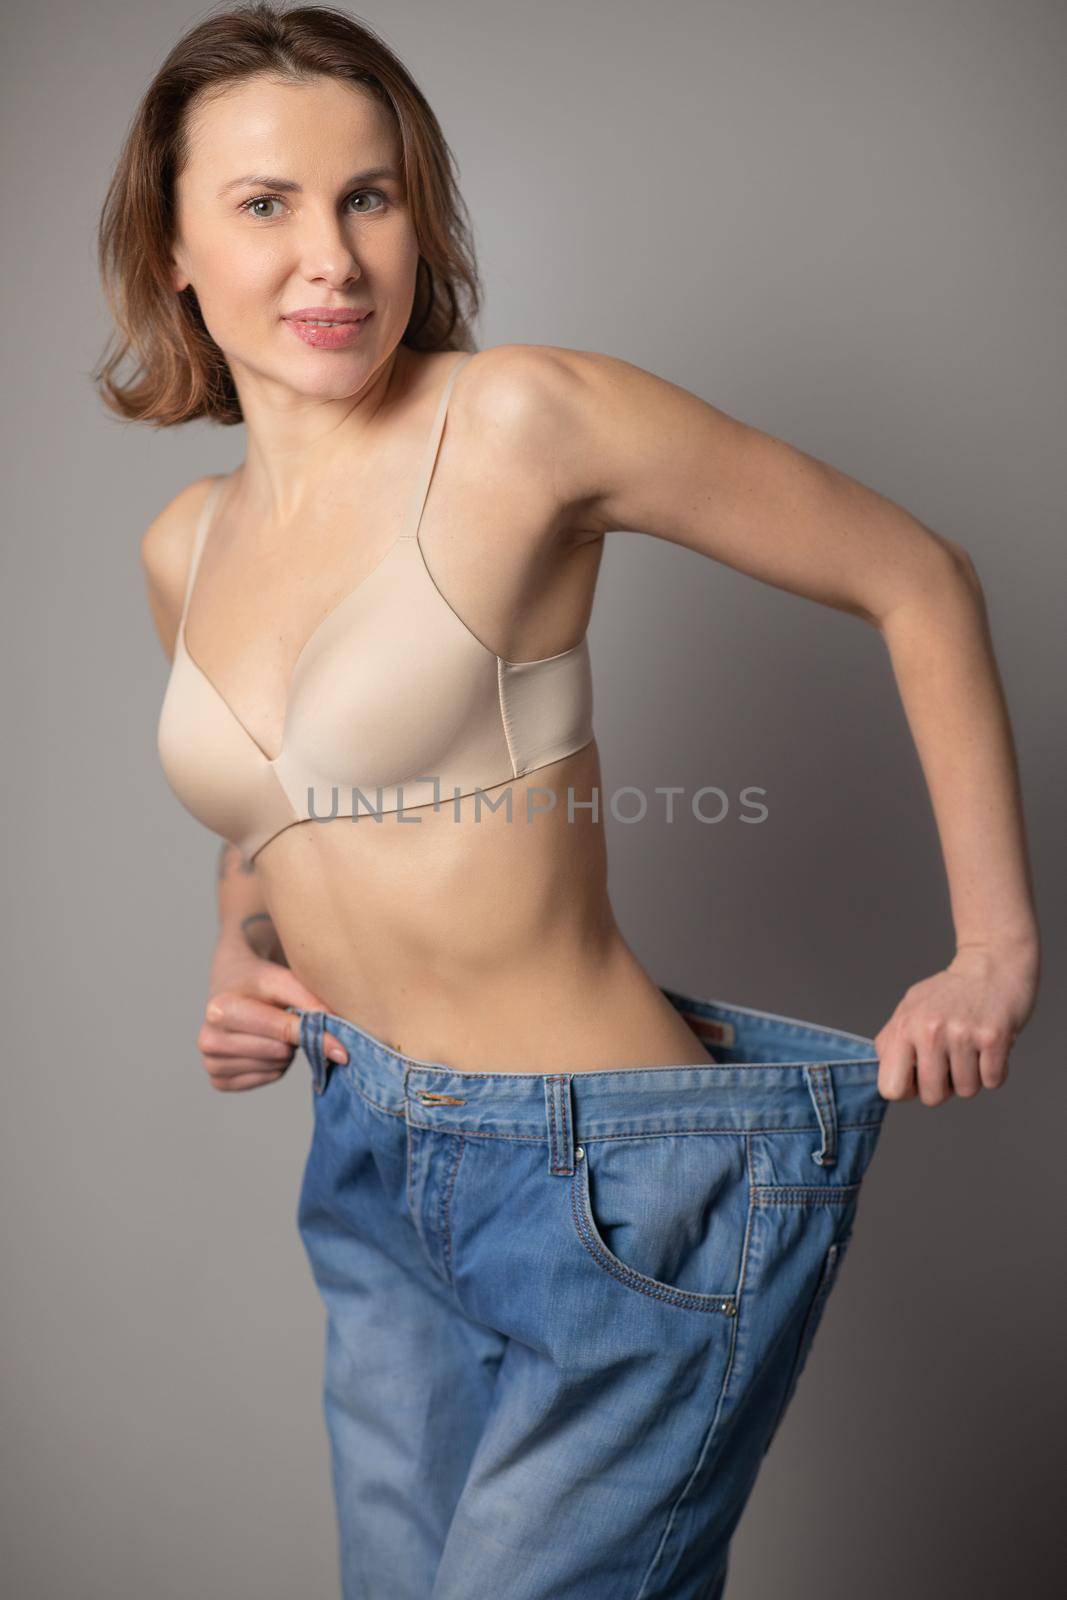 Woman Losing Weight After Diet, Slim Down, Burning Fat and Flat Waist. Thin Girl Show Weight Loss and Old Big Jeans. Skinny Female Belly Wearing Too Large Pants. by uflypro